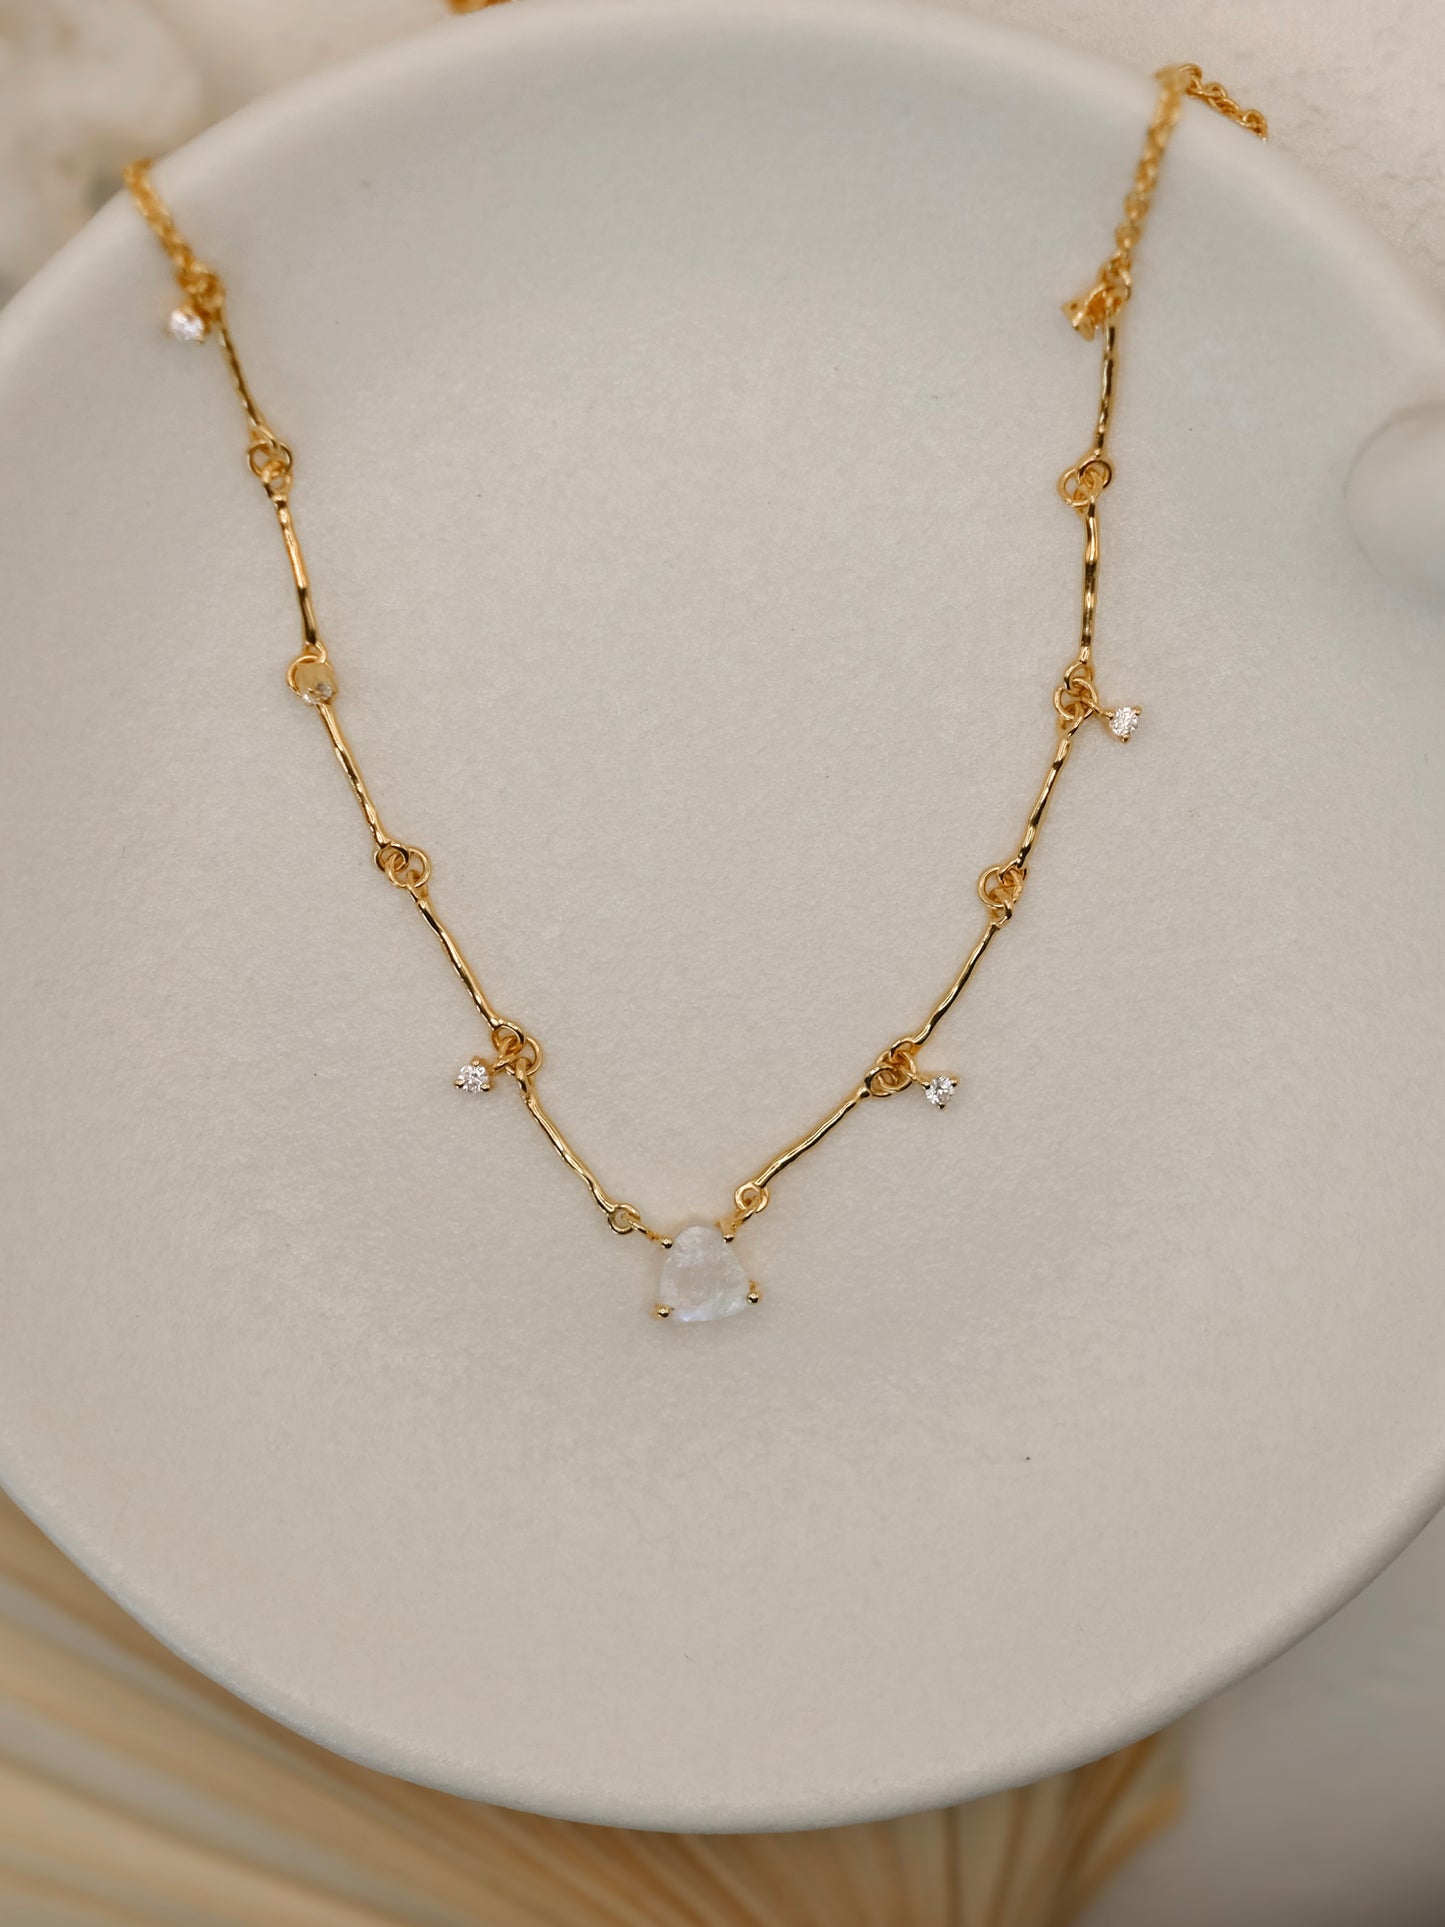 Raw Ethereal moonstone necklace gold